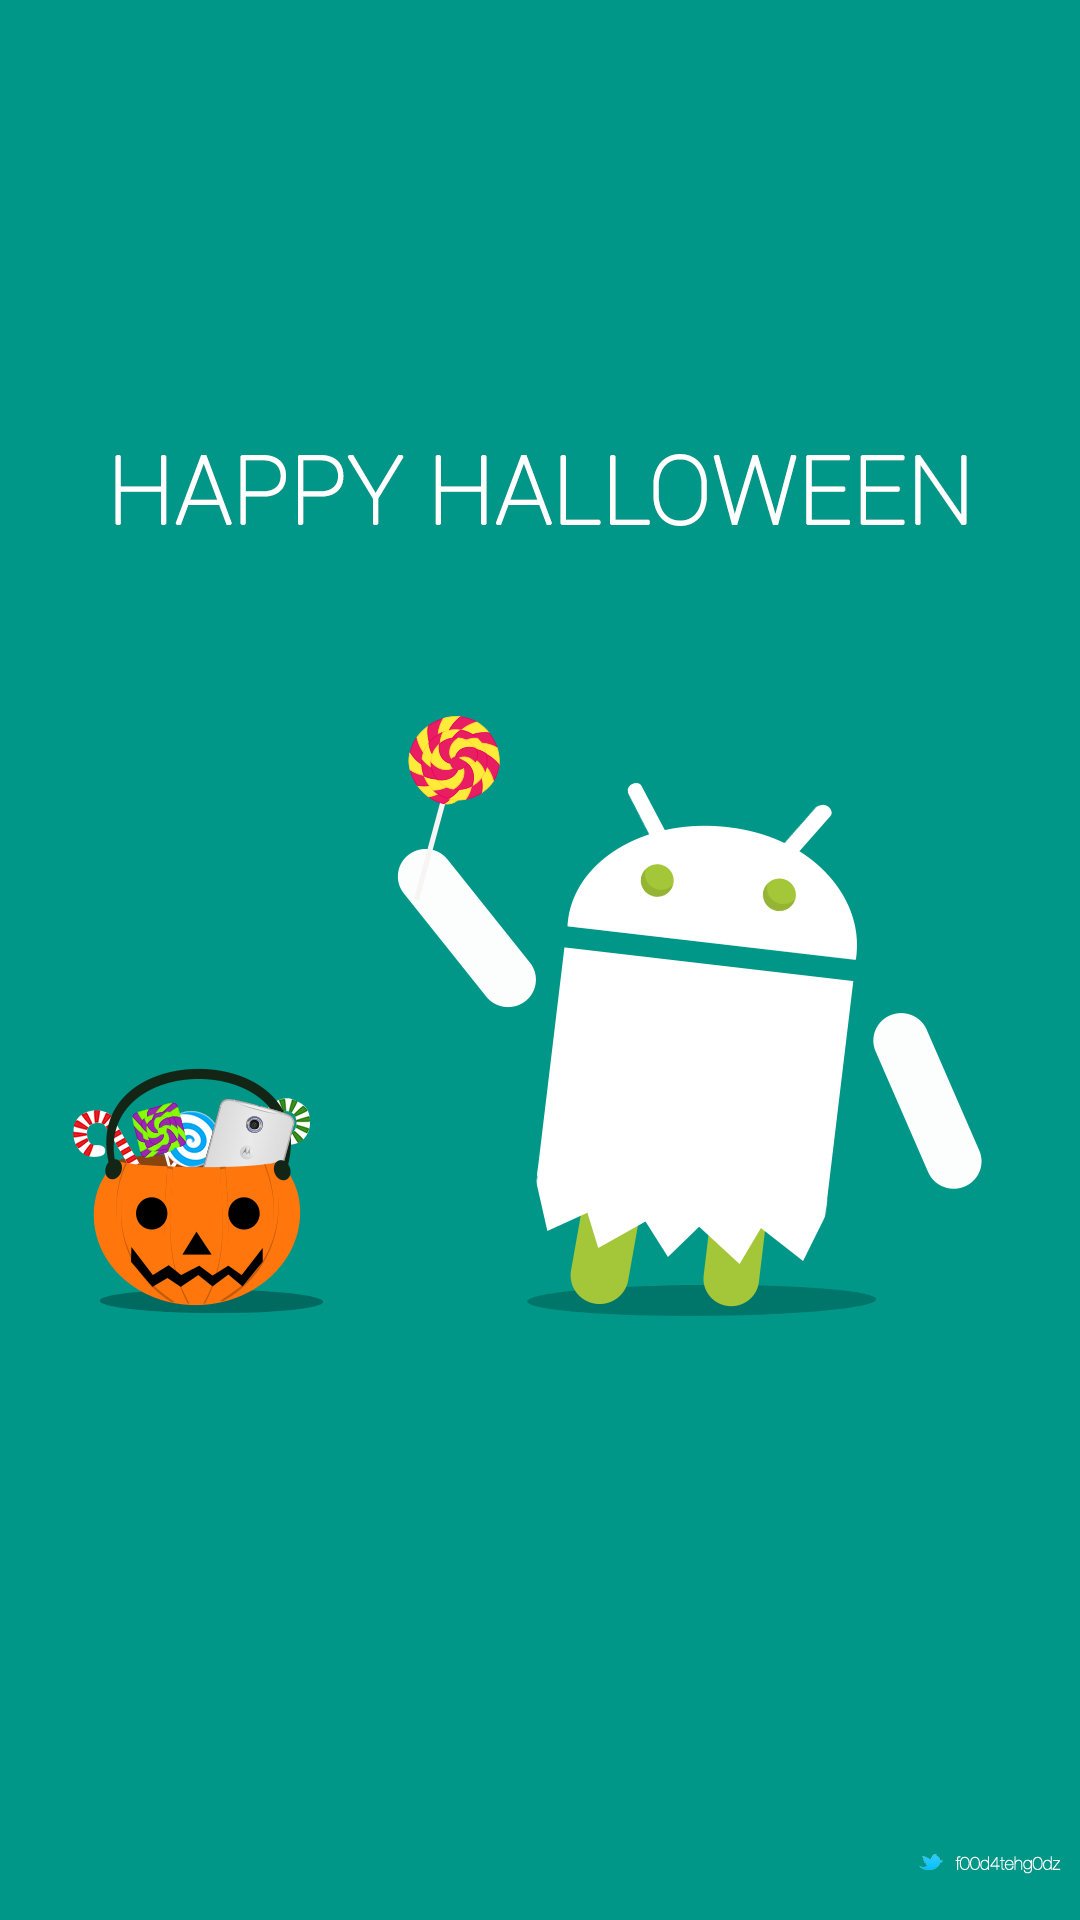 android android lolipopp lollipop android halloween Happy Halloween happy halloween android